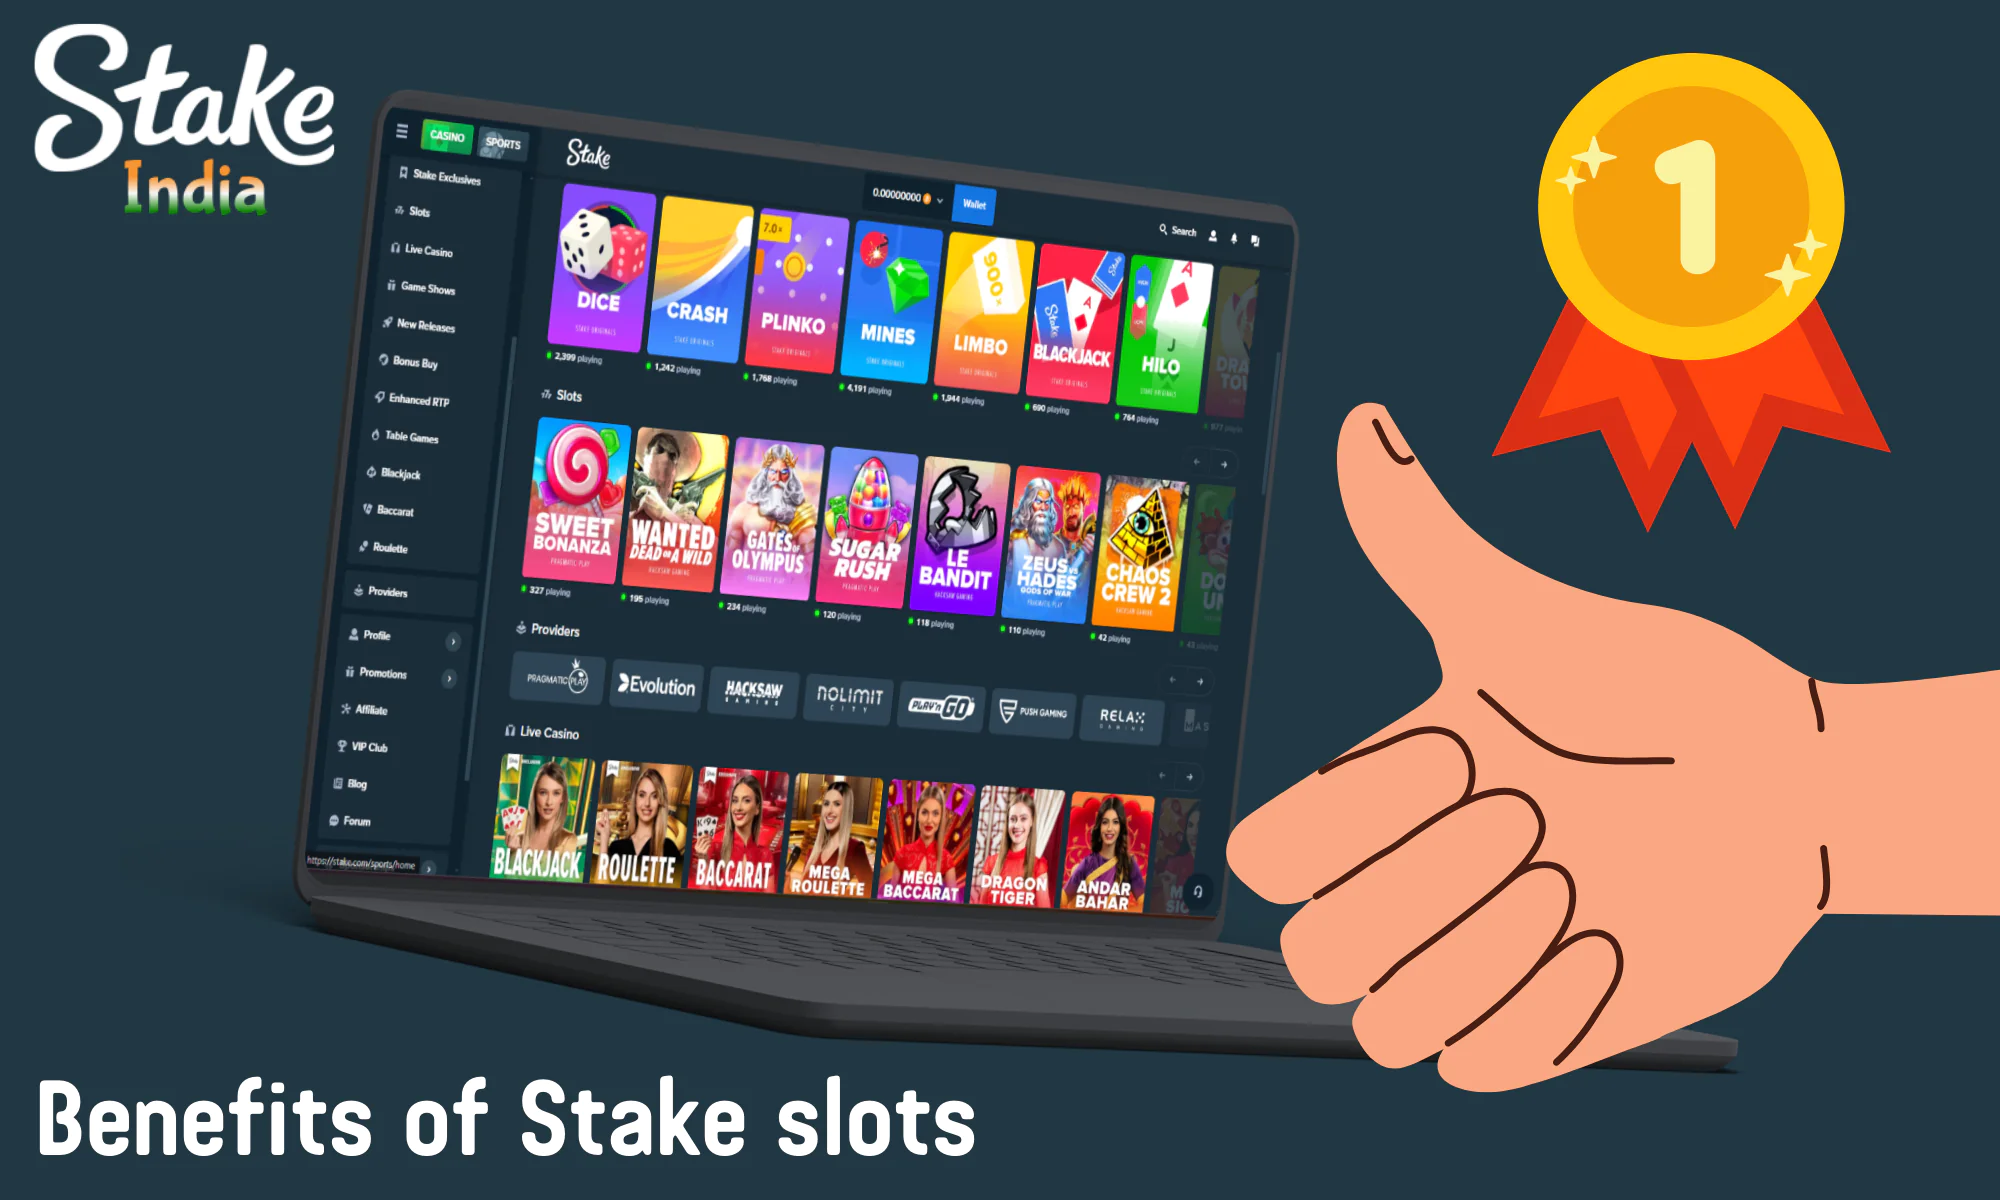 Stake slot machines have various advantages